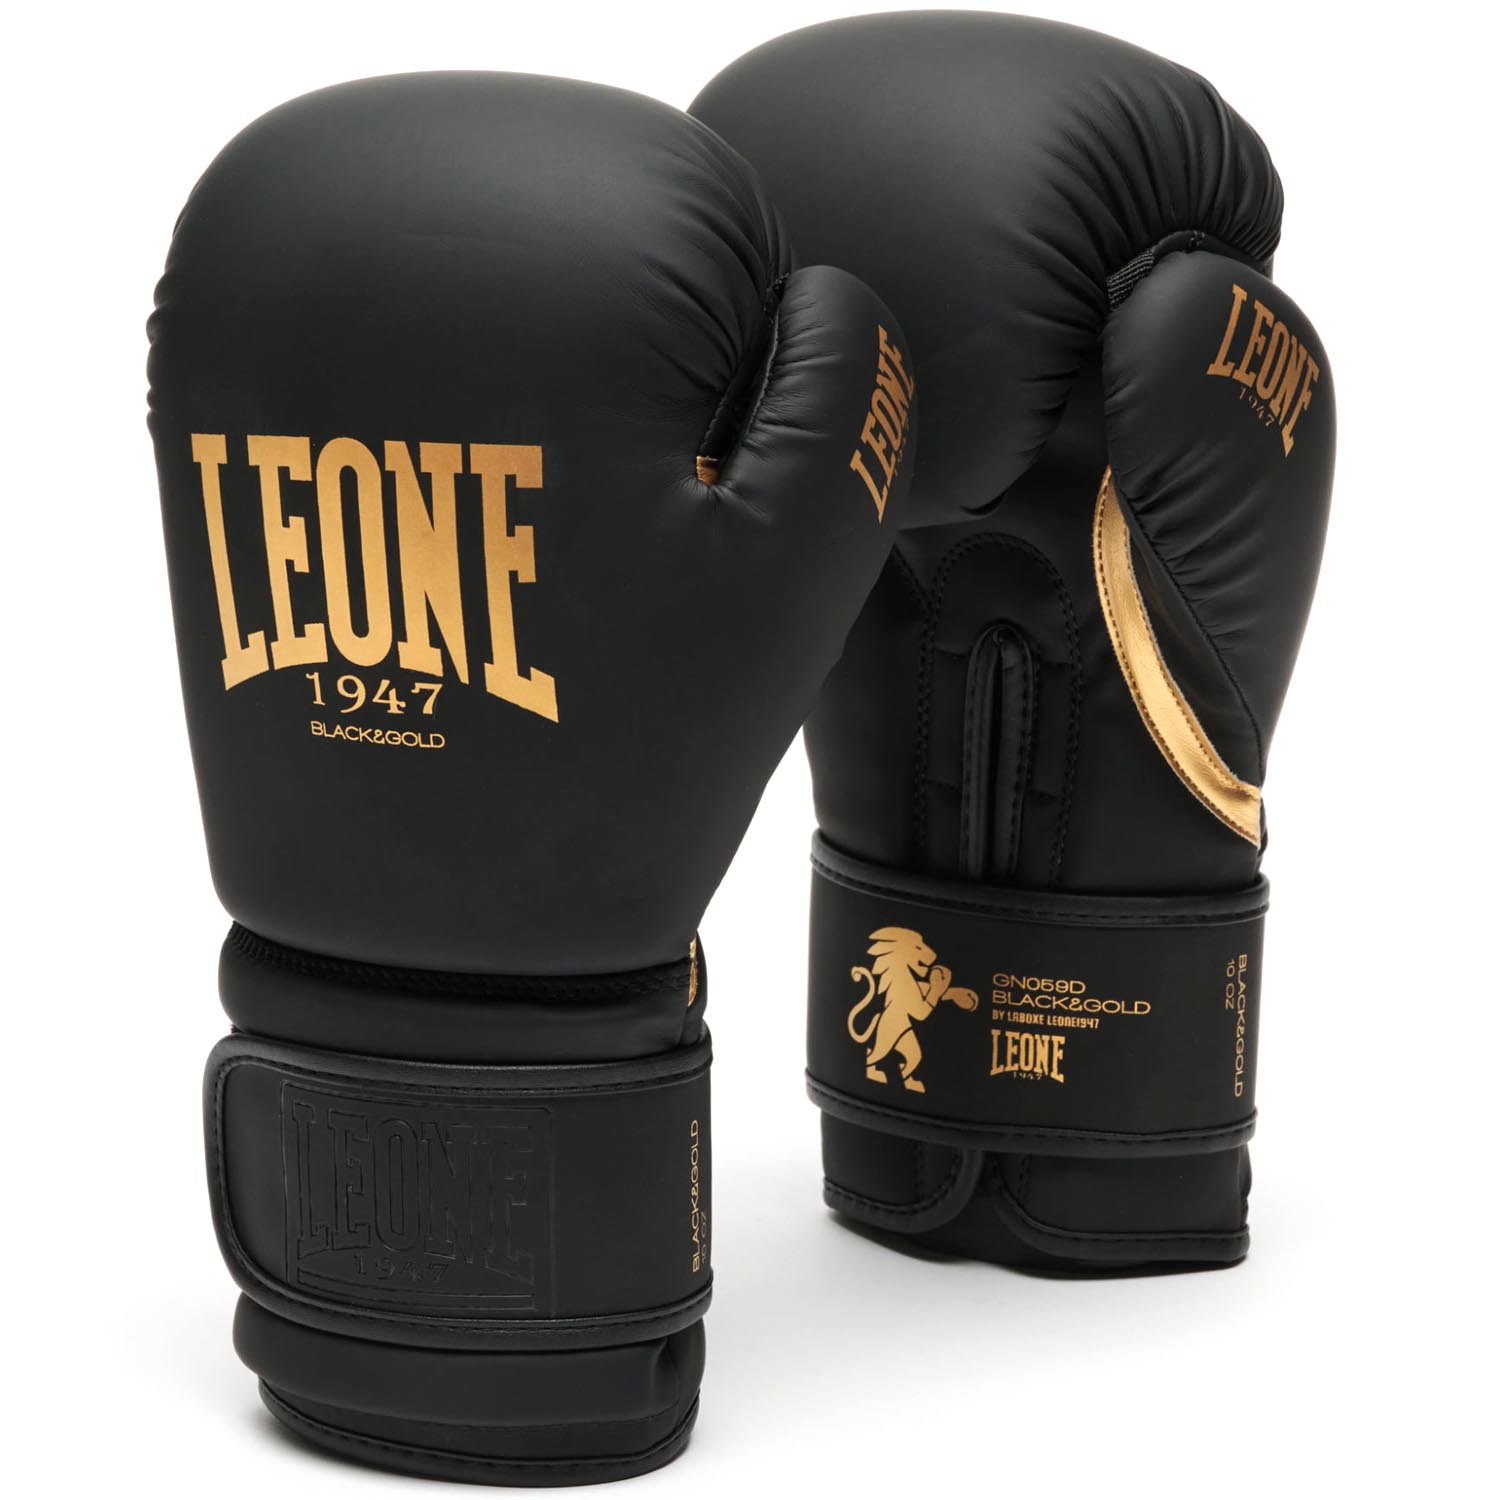 Boxing Gloves with low price - perfect for beginners and with great quality  shop now